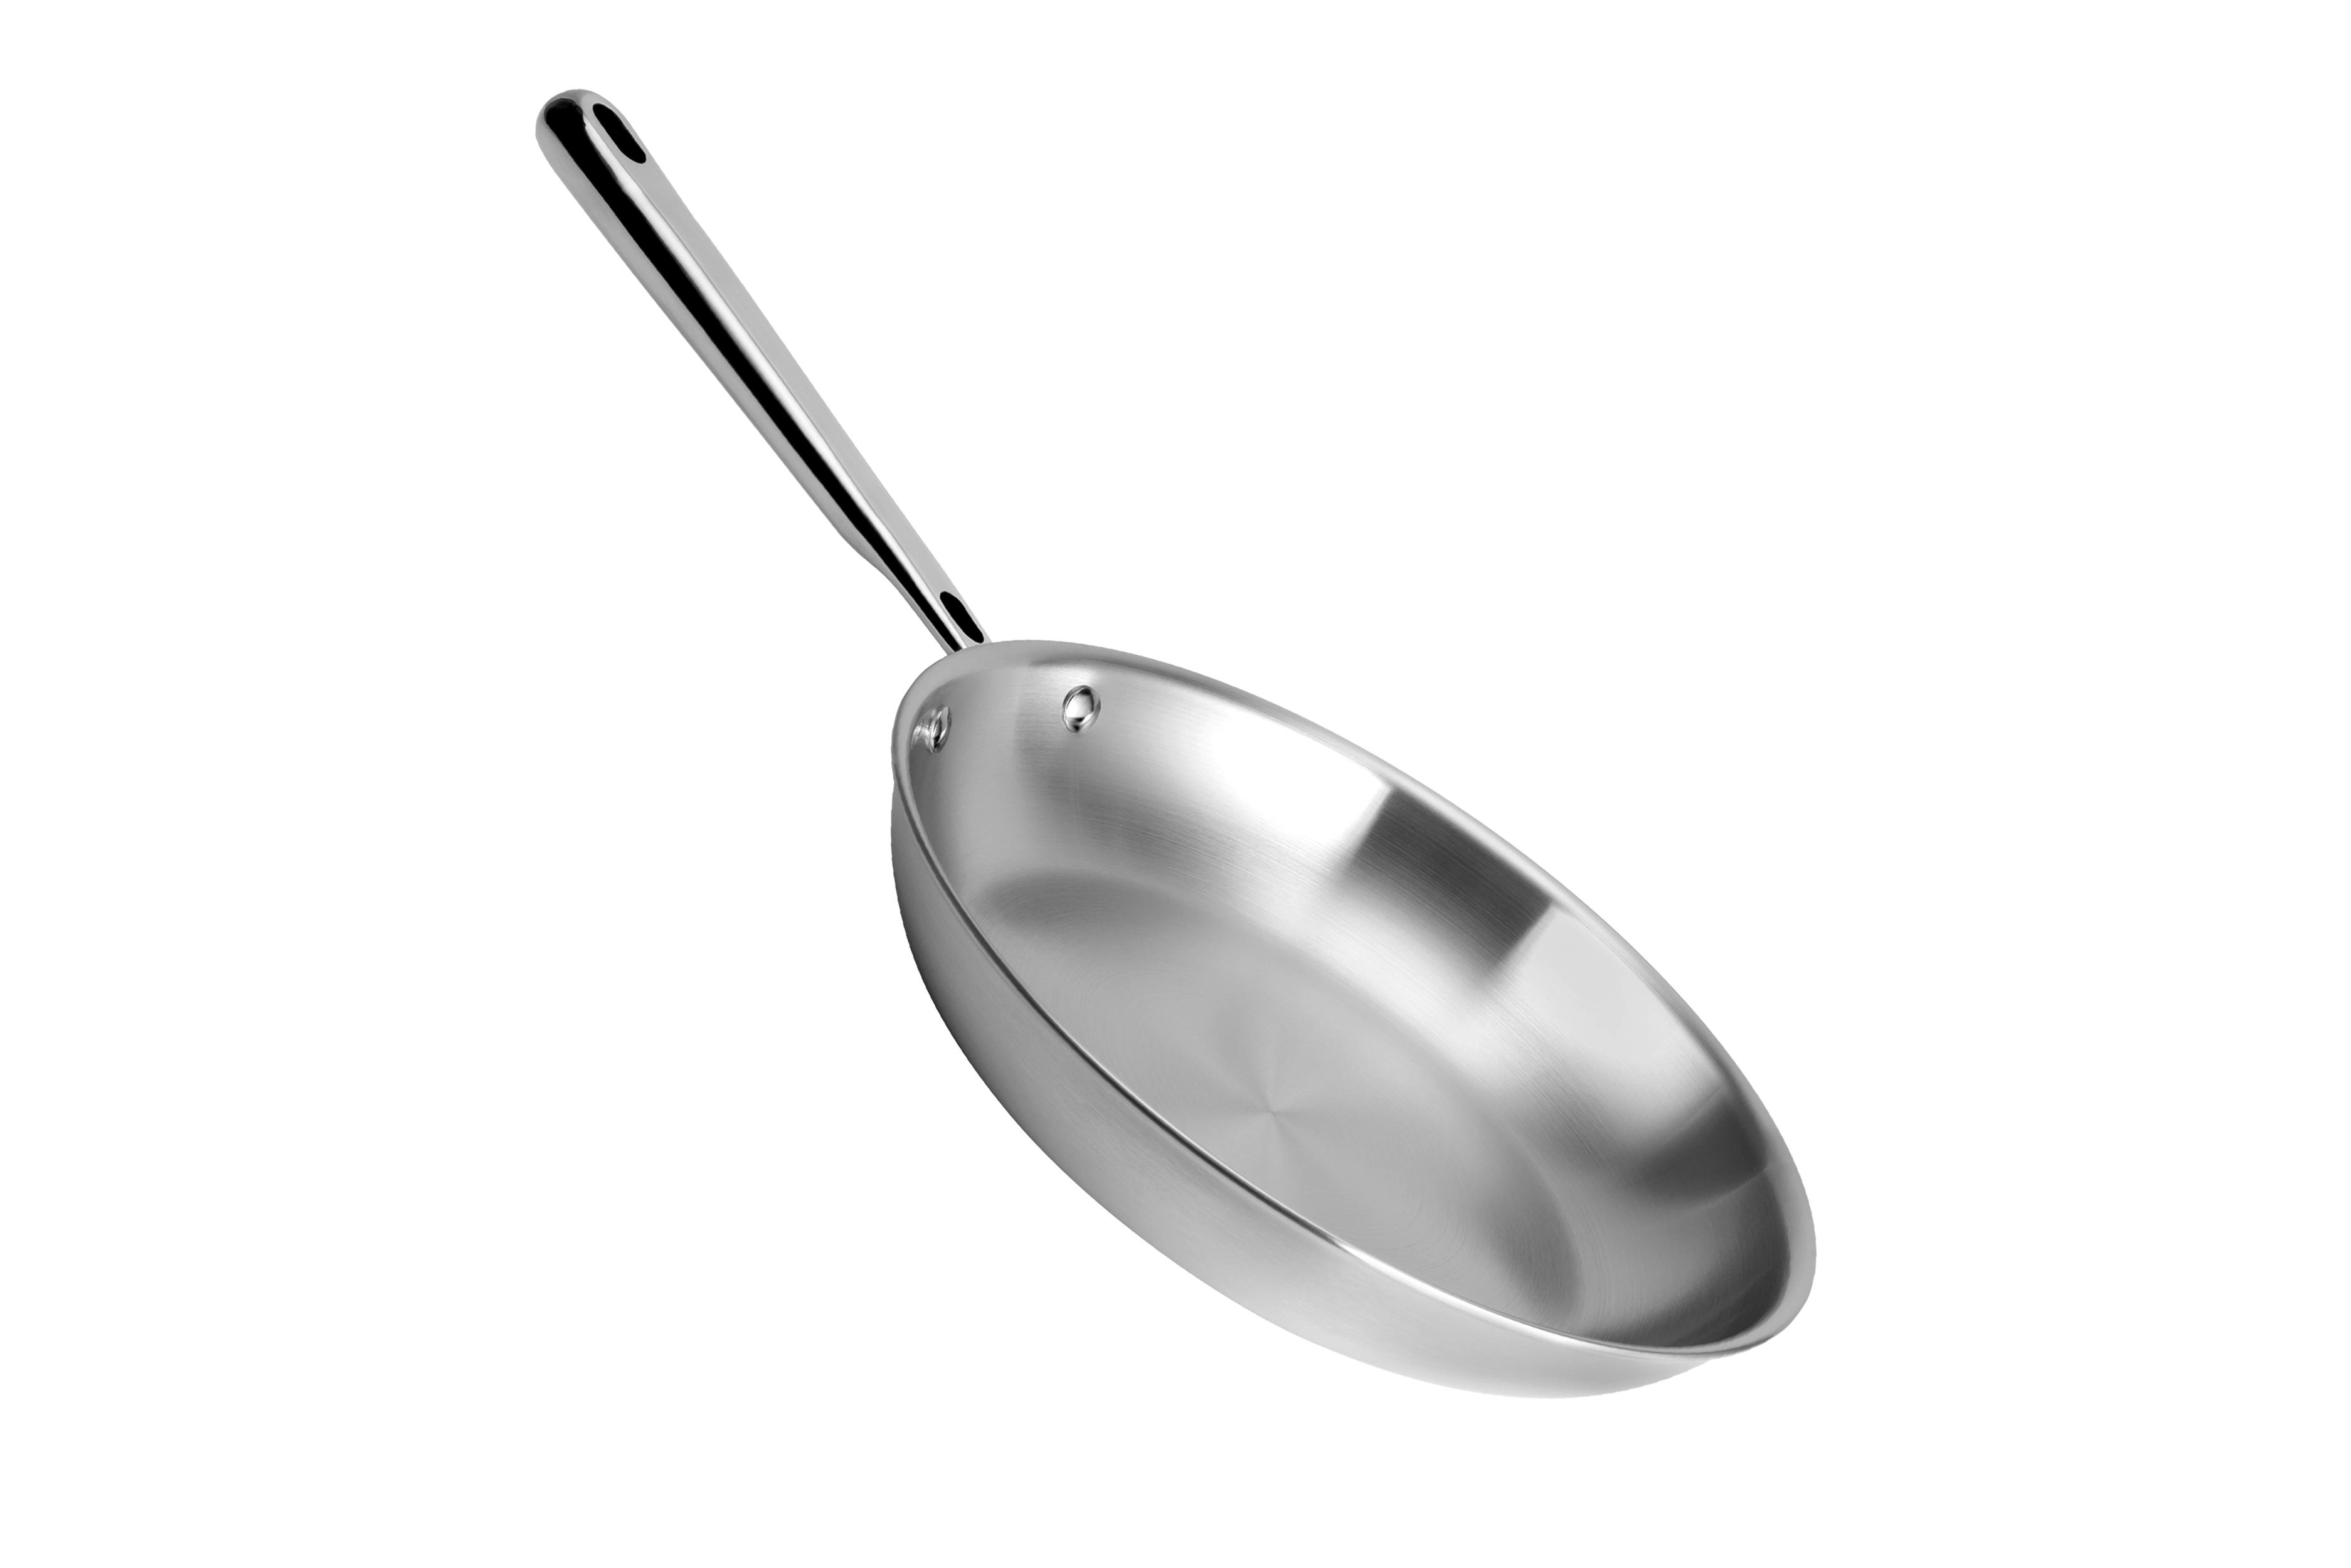 How to Use Misen 5 Ply Stainless Steel Frying Pan? 